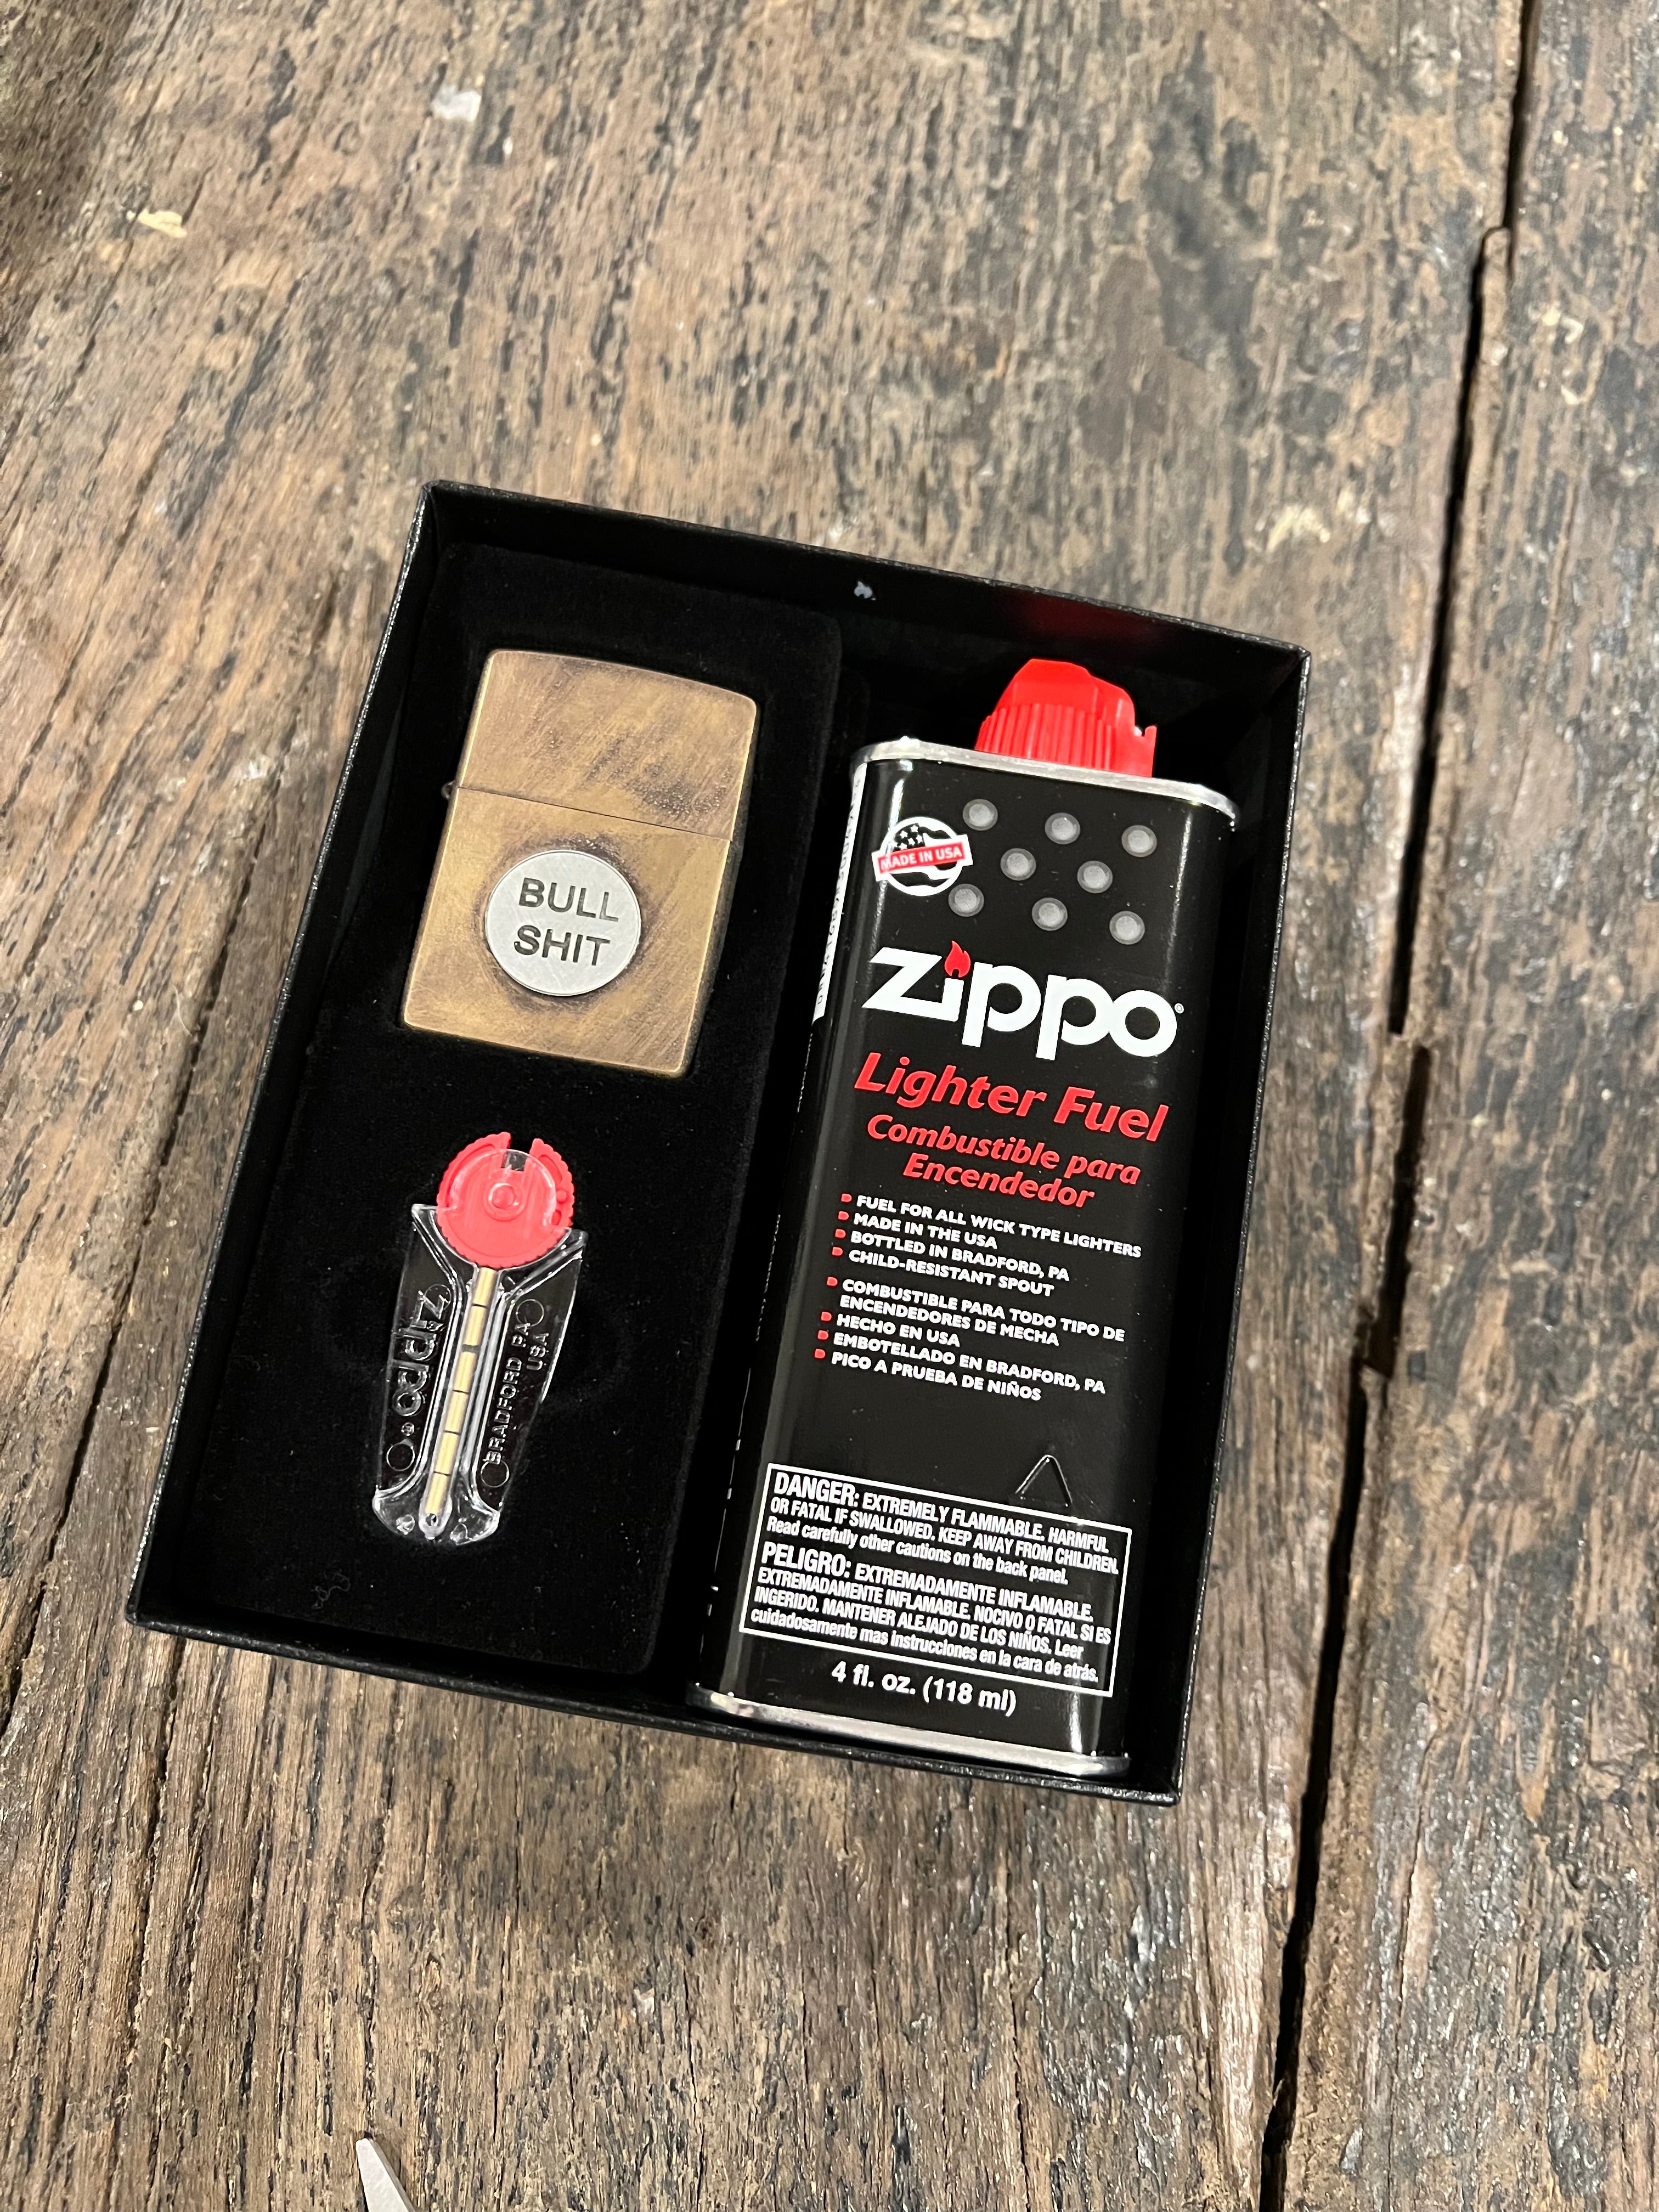 Zippo Lighter Display Set With Fuel and Flint